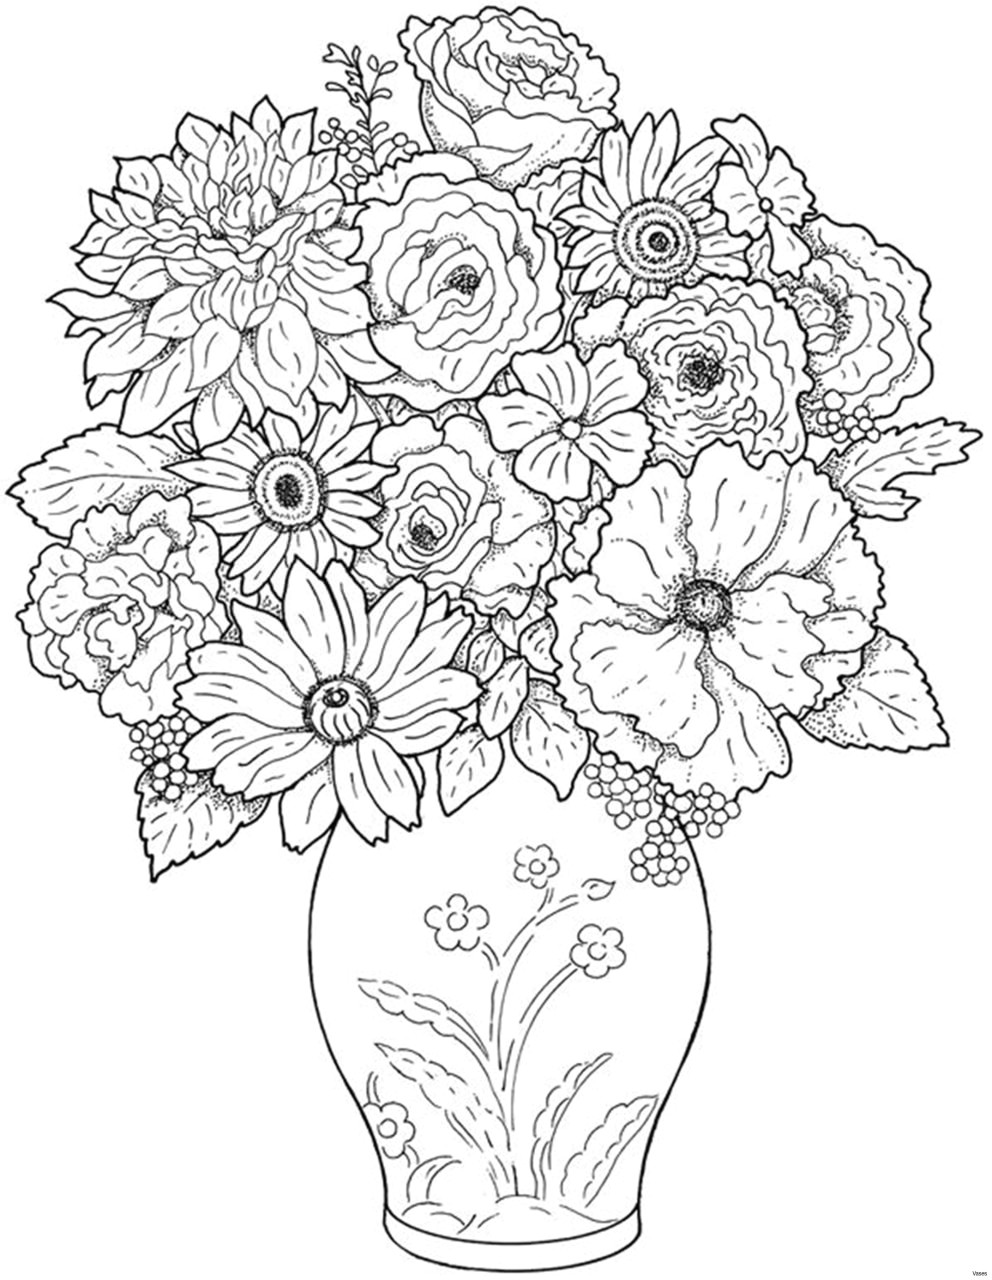 images of flowers cool vases flower vase coloring page pages flowers wall mounted vase images of